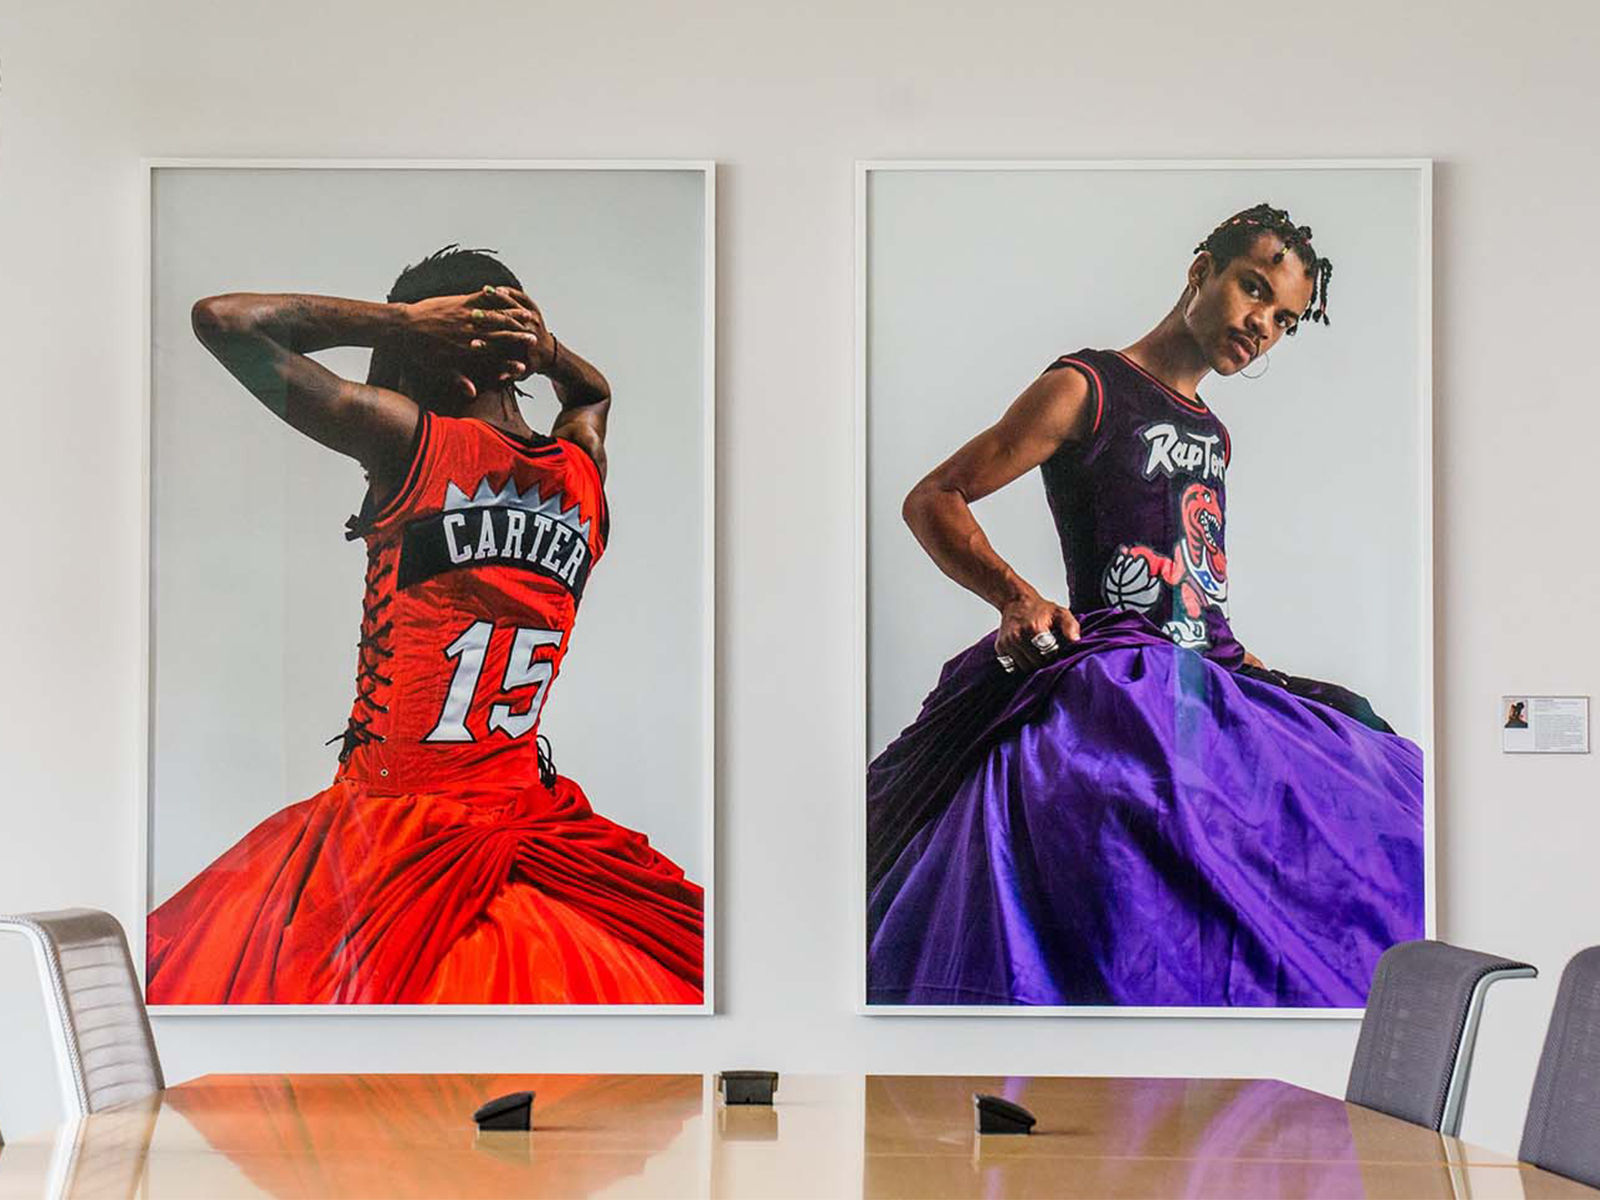 Two large Pride-themed portraits of Toronto Raptors players wearing gowns, in a Tangerine conference room.